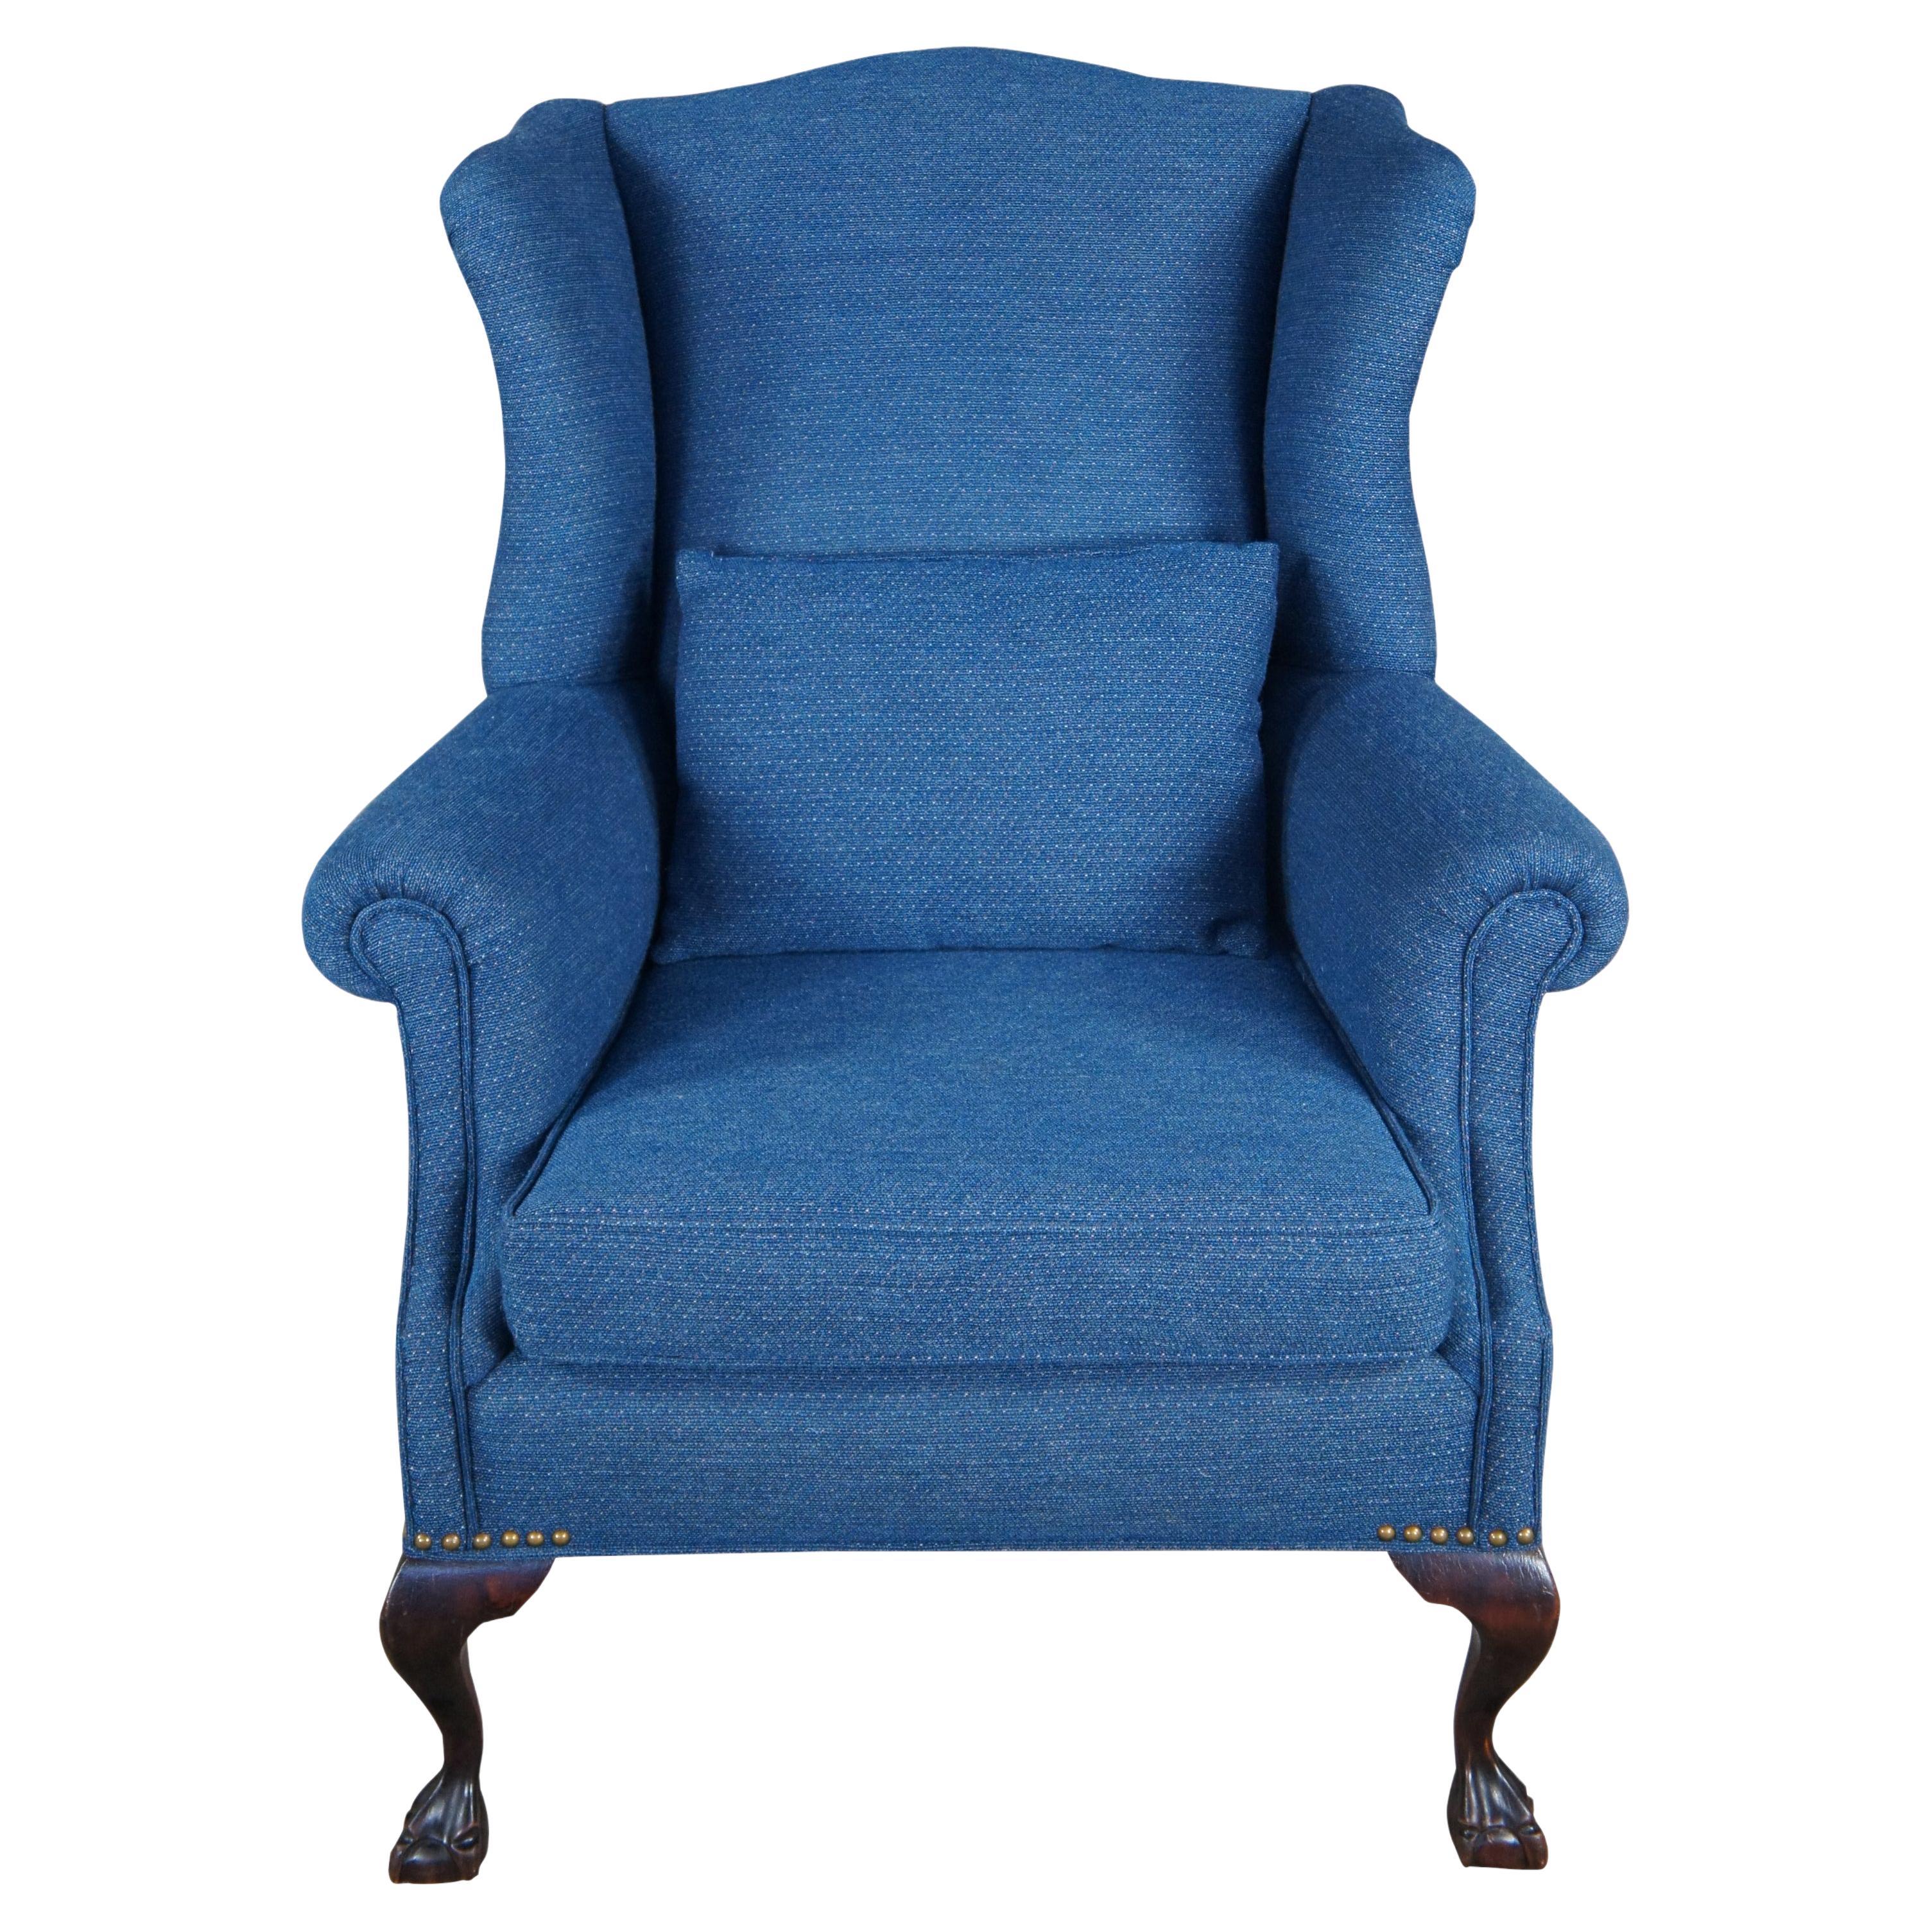 Vintage Chippendale Style Blue Upholstered Mahogany Wingback Library Arm Chair